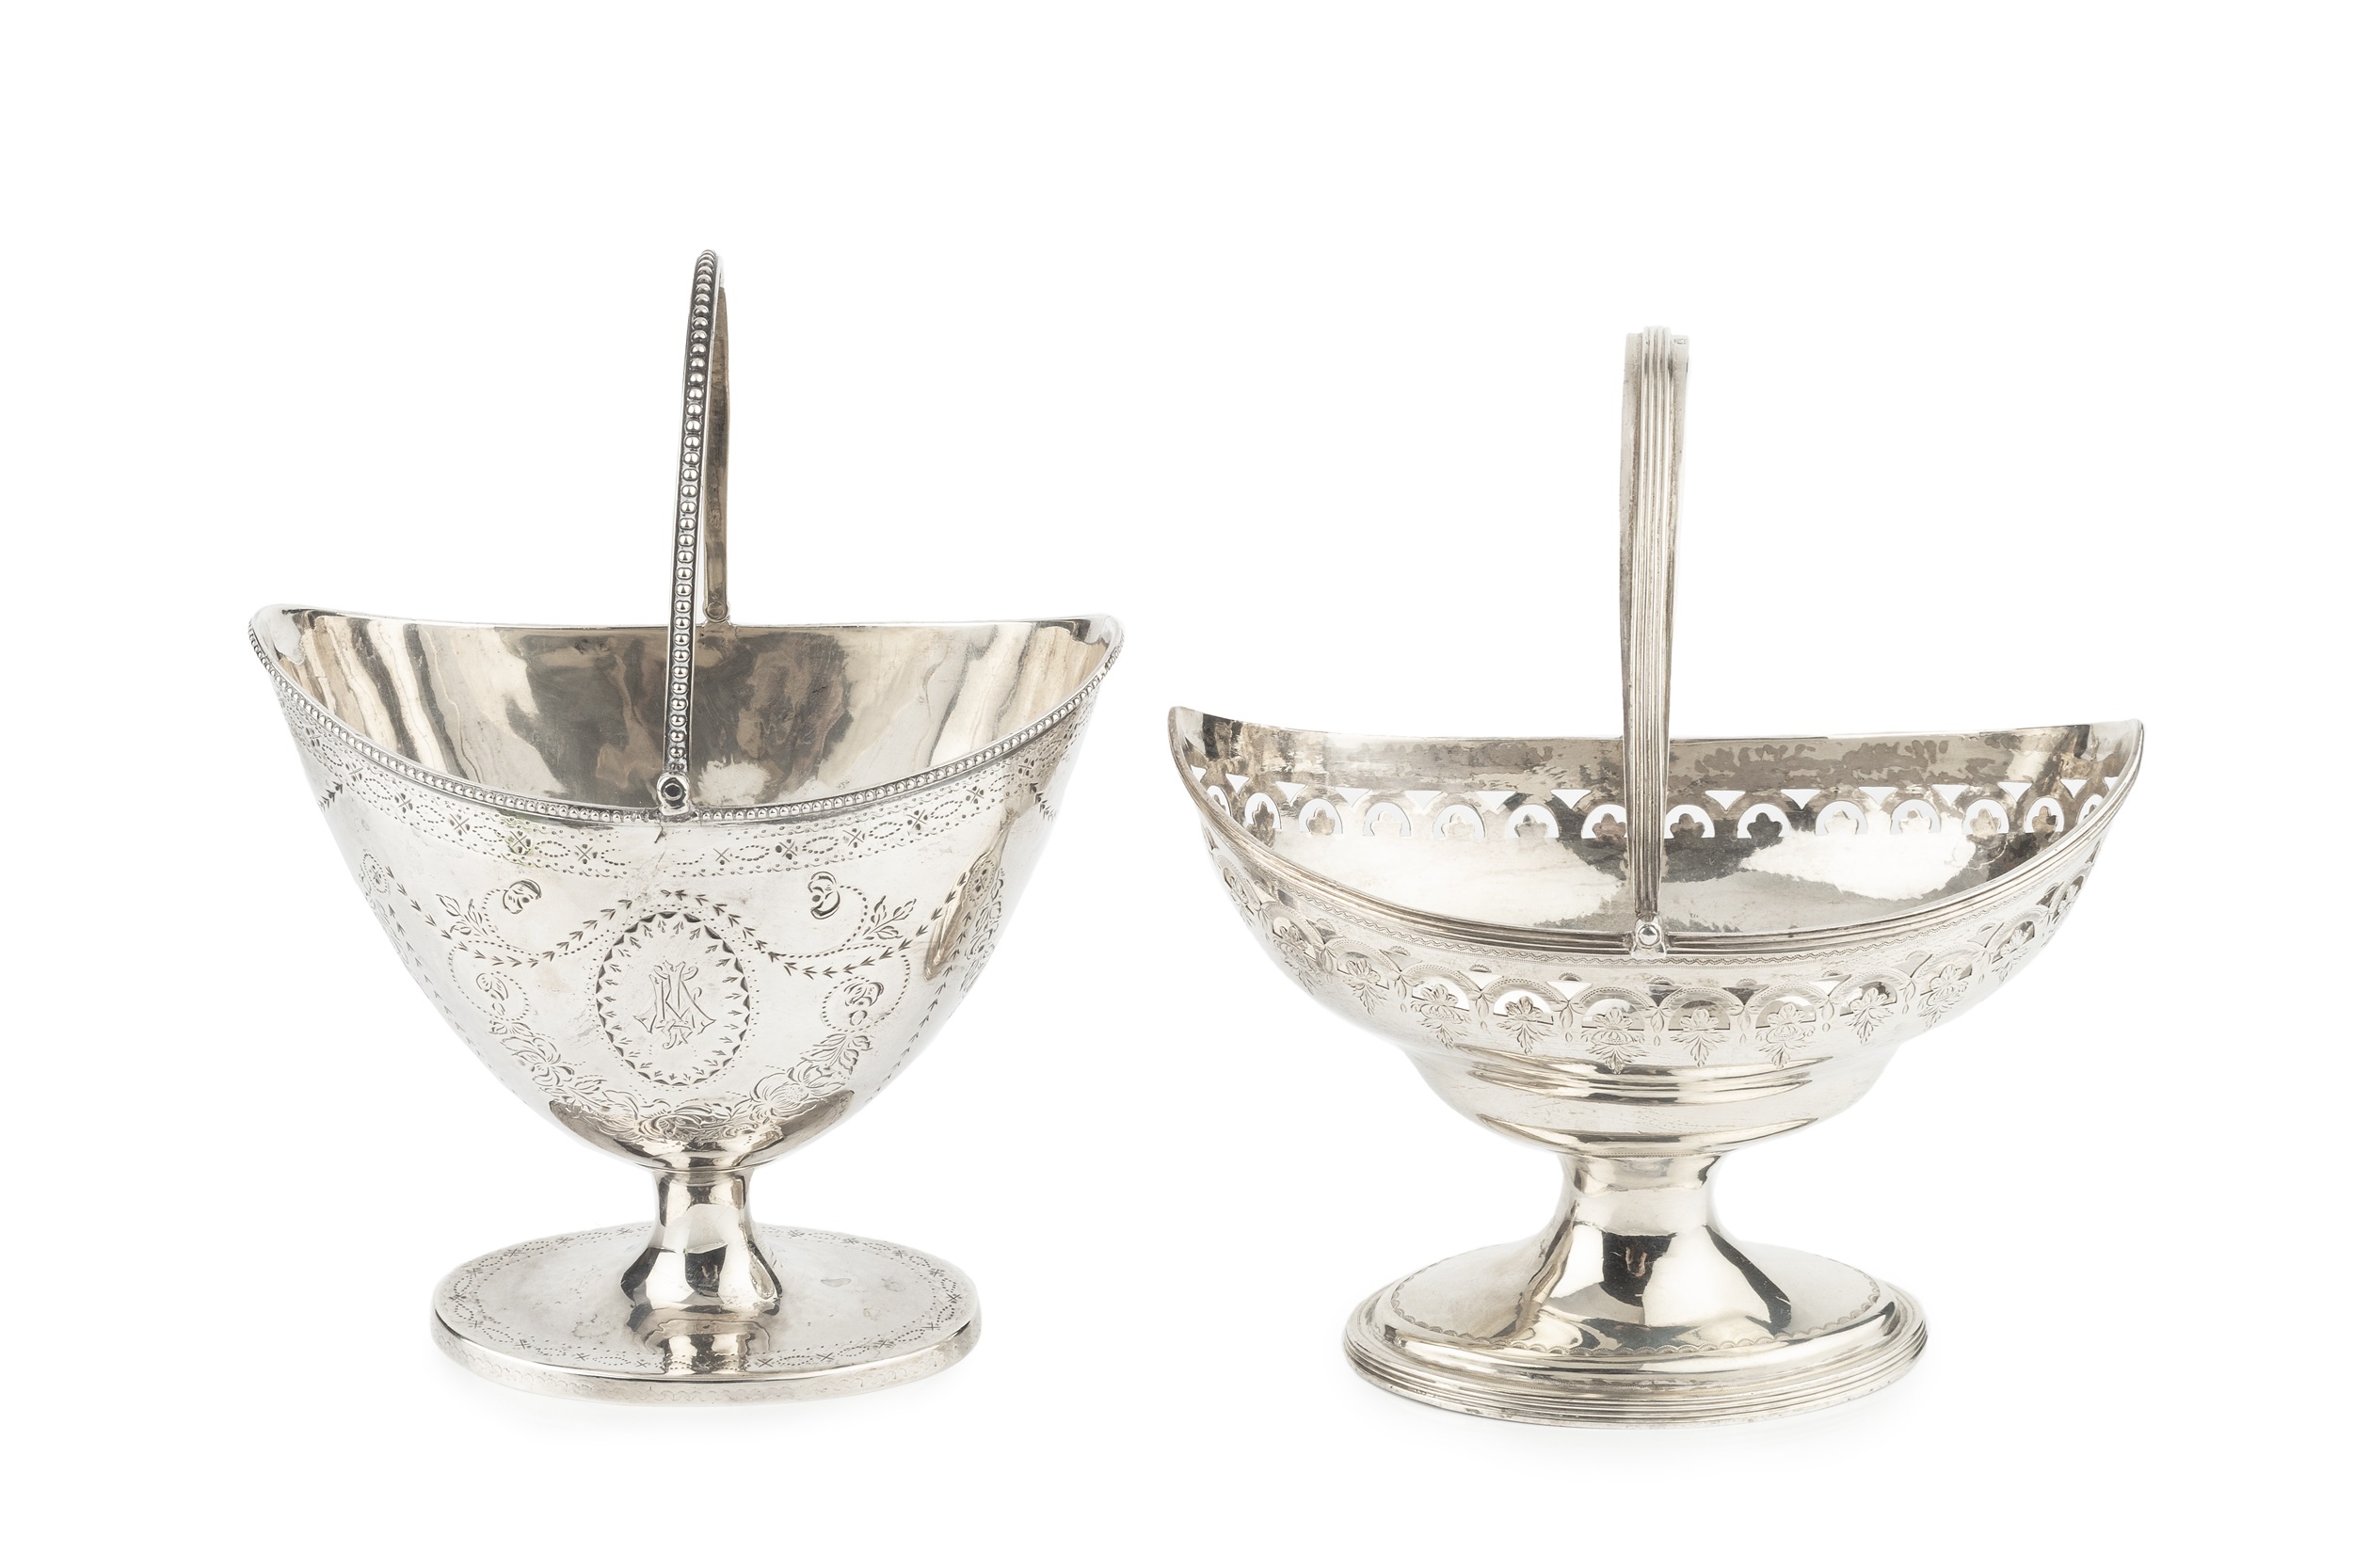 A George III silver swing handled sugar basket, with beaded border and handle, and bright-cut